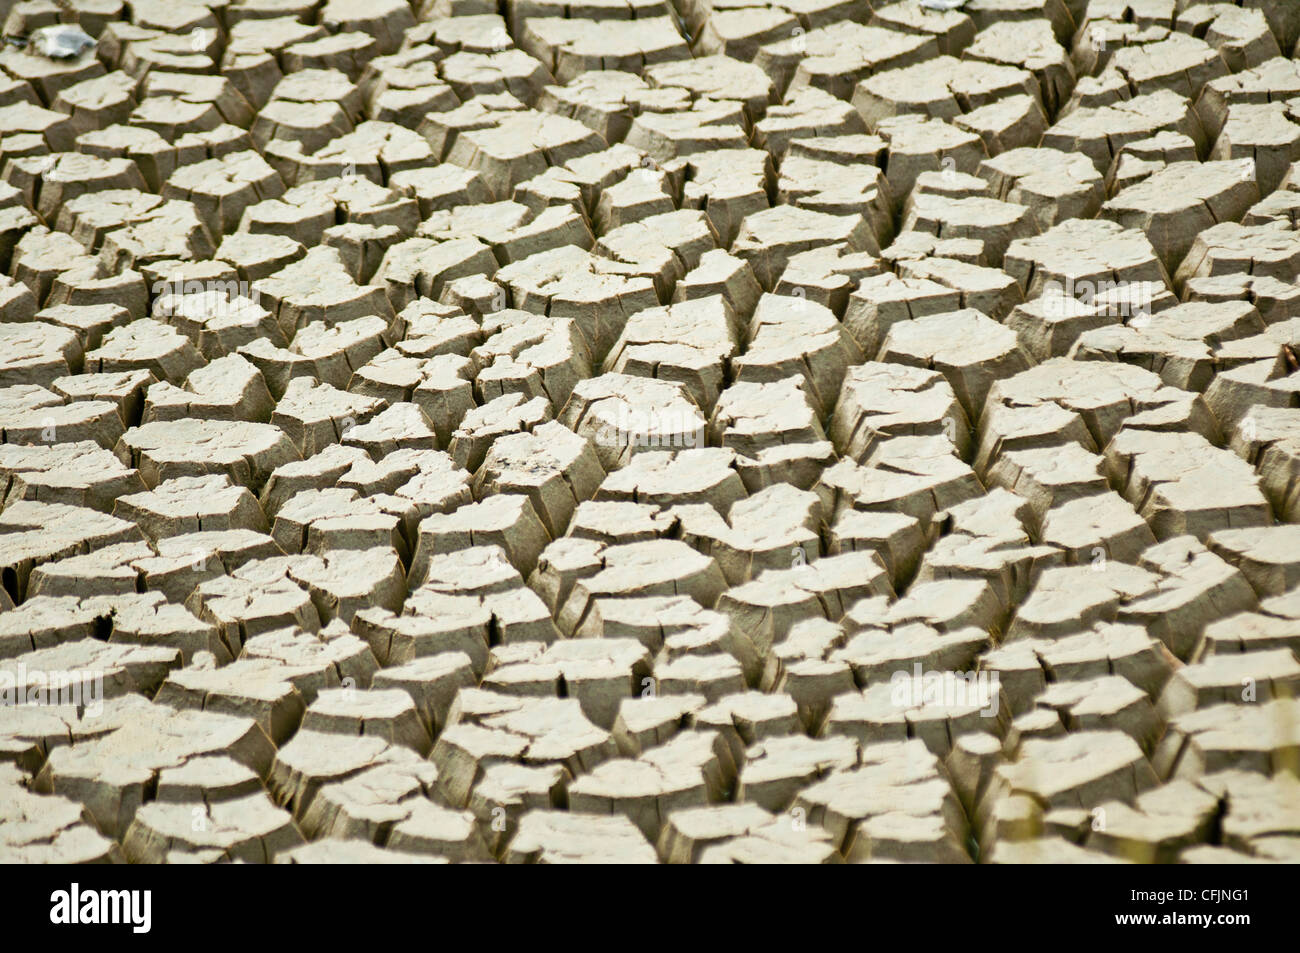 Dry heavy cracked Earth as a result of drought, parched mud, global warming alert, greenhouse effect danger Stock Photo